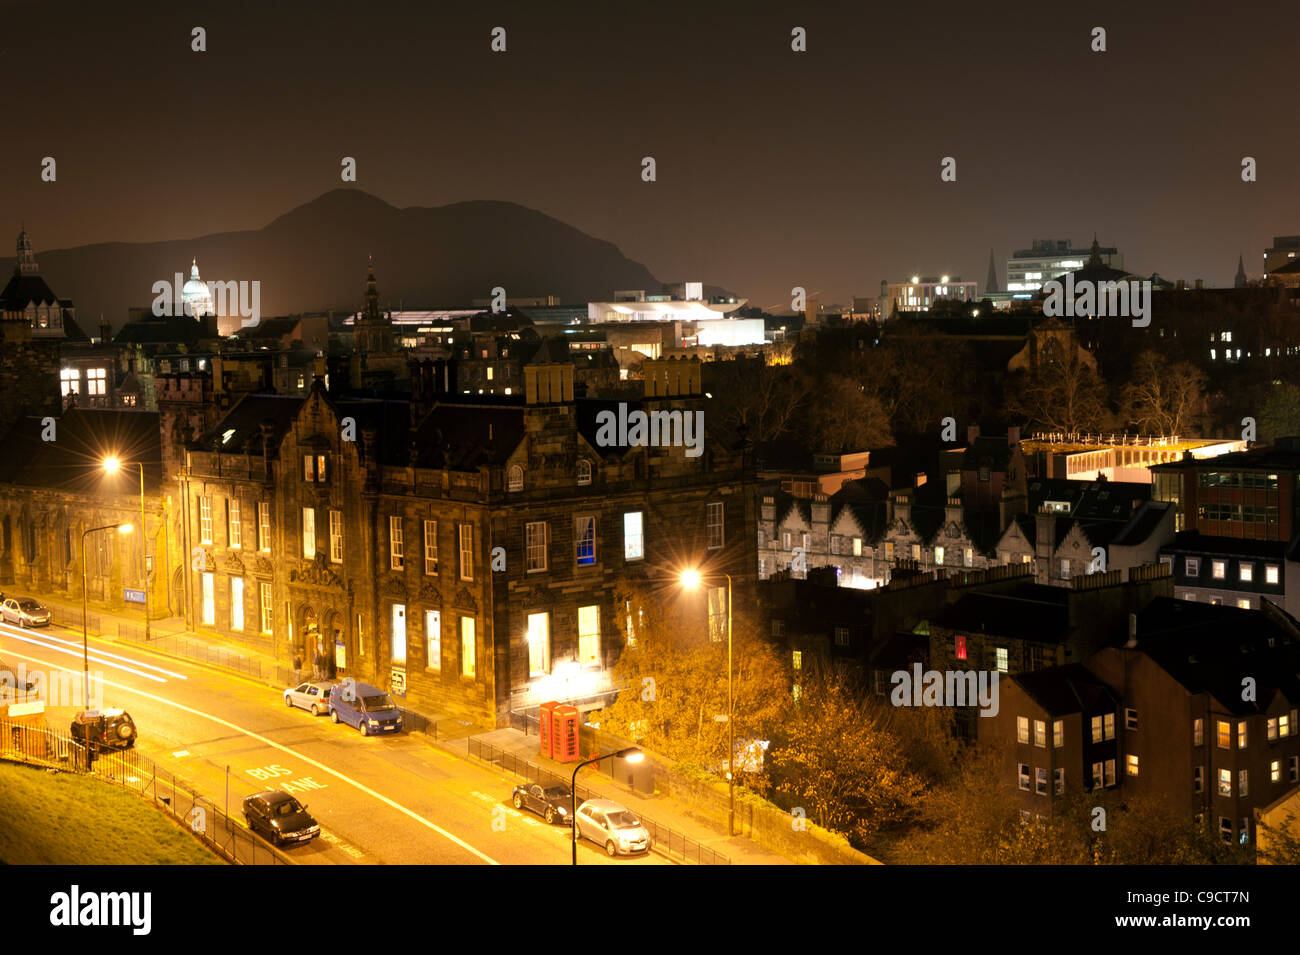 View of Johnston Terrace with Arthur's Seat in the background photographed at night from Edinburgh Castle, Scotland. Stock Photo